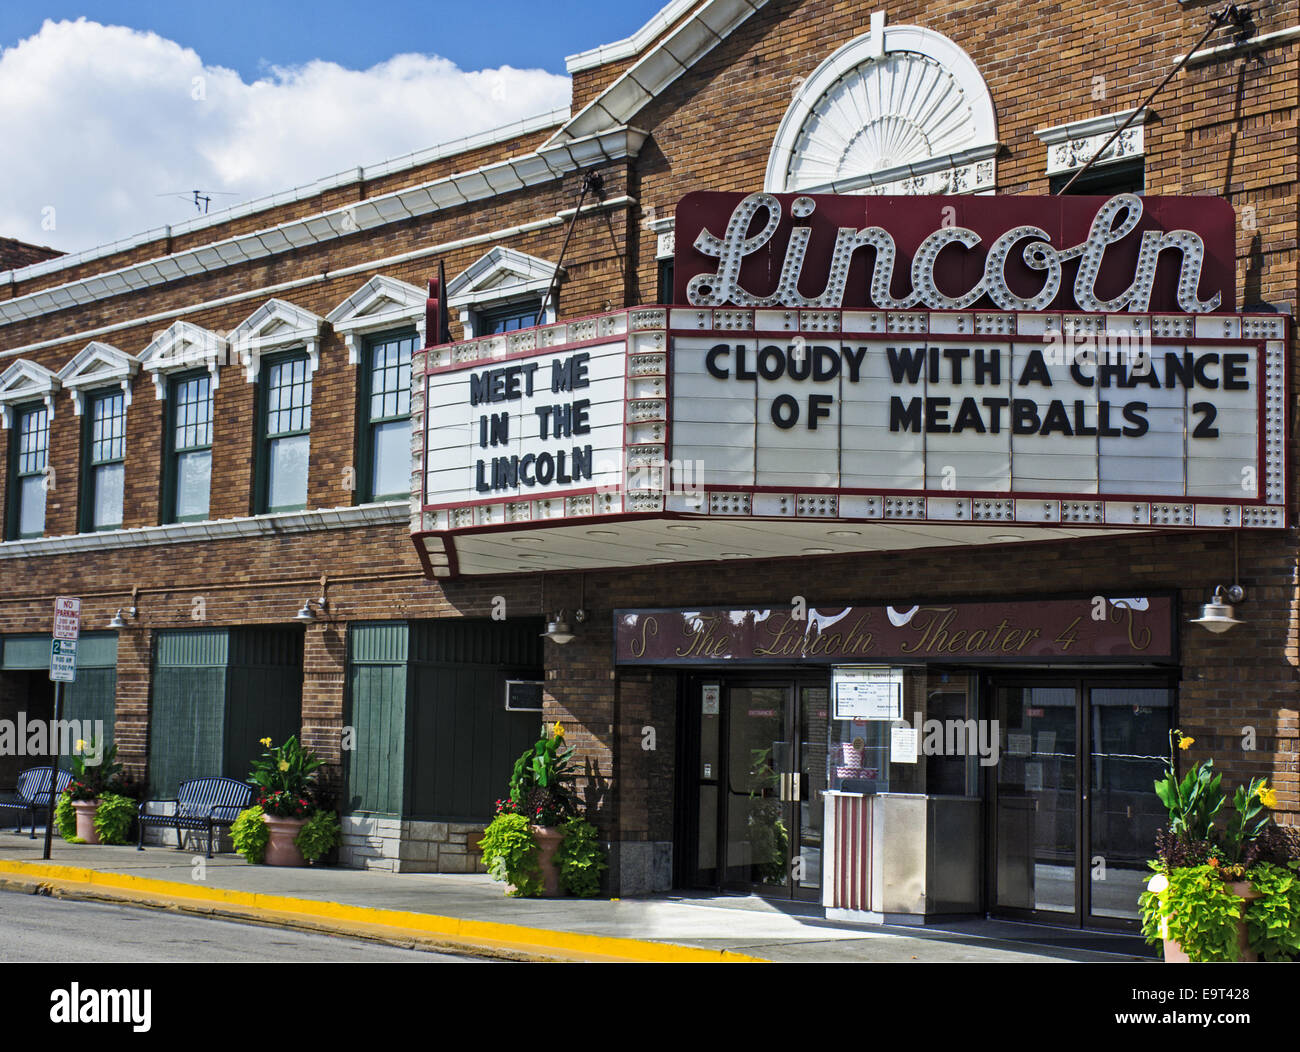 Lincoln Theater in Lincoln, Illinois, einer Stadt entlang der Route 66 Stockfoto